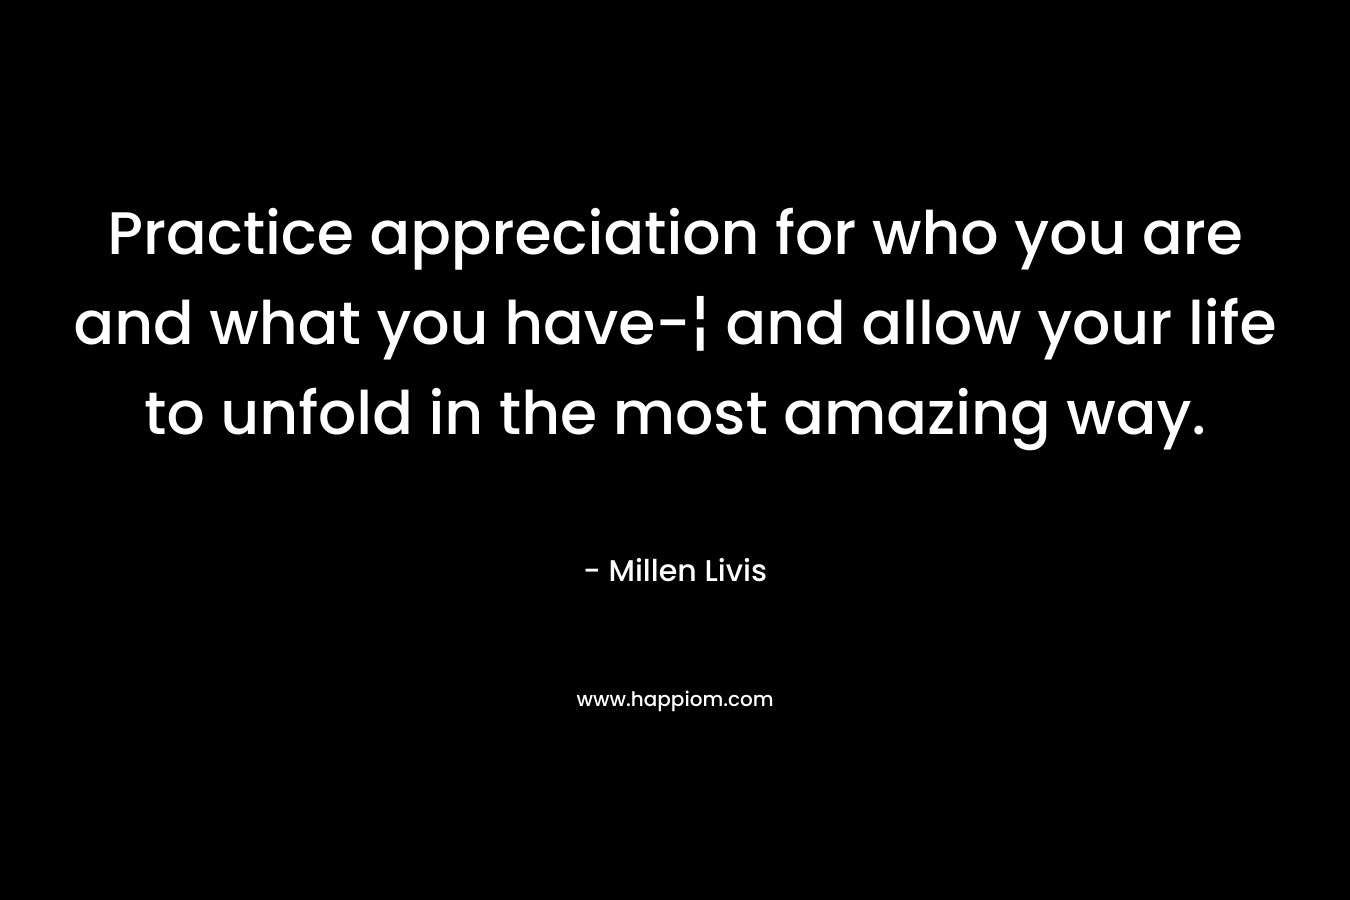 Practice appreciation for who you are and what you have-¦ and allow your life to unfold in the most amazing way. – Millen Livis